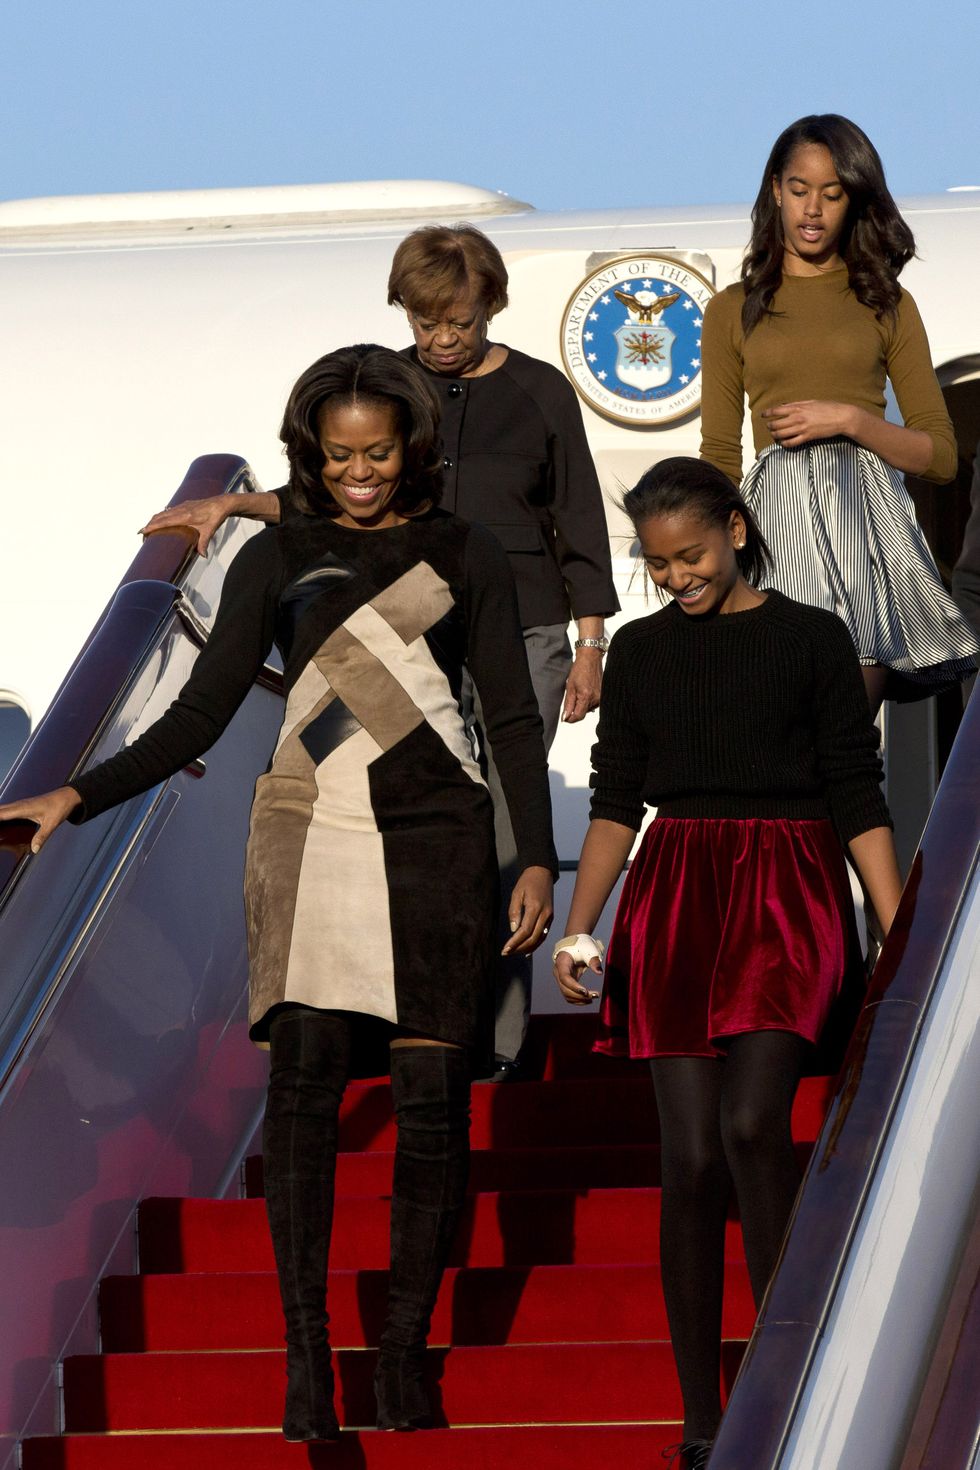 BEIJING, CHINA - MARCH 20:  First Lady Michelle Obama with her mother Marian Robinson, daughters Sasha Obama and Malia Obama arrives at Beijing Capital International Airport on March 20, 2014 in Beijing, China. The first lady arrived in Beijing with her mother, Marian Robinson, and daughters to kick off a six-day tour where she will focus on education and cultural exchange. (Photo by Alexander F. Yuan - Pool /Getty Images)